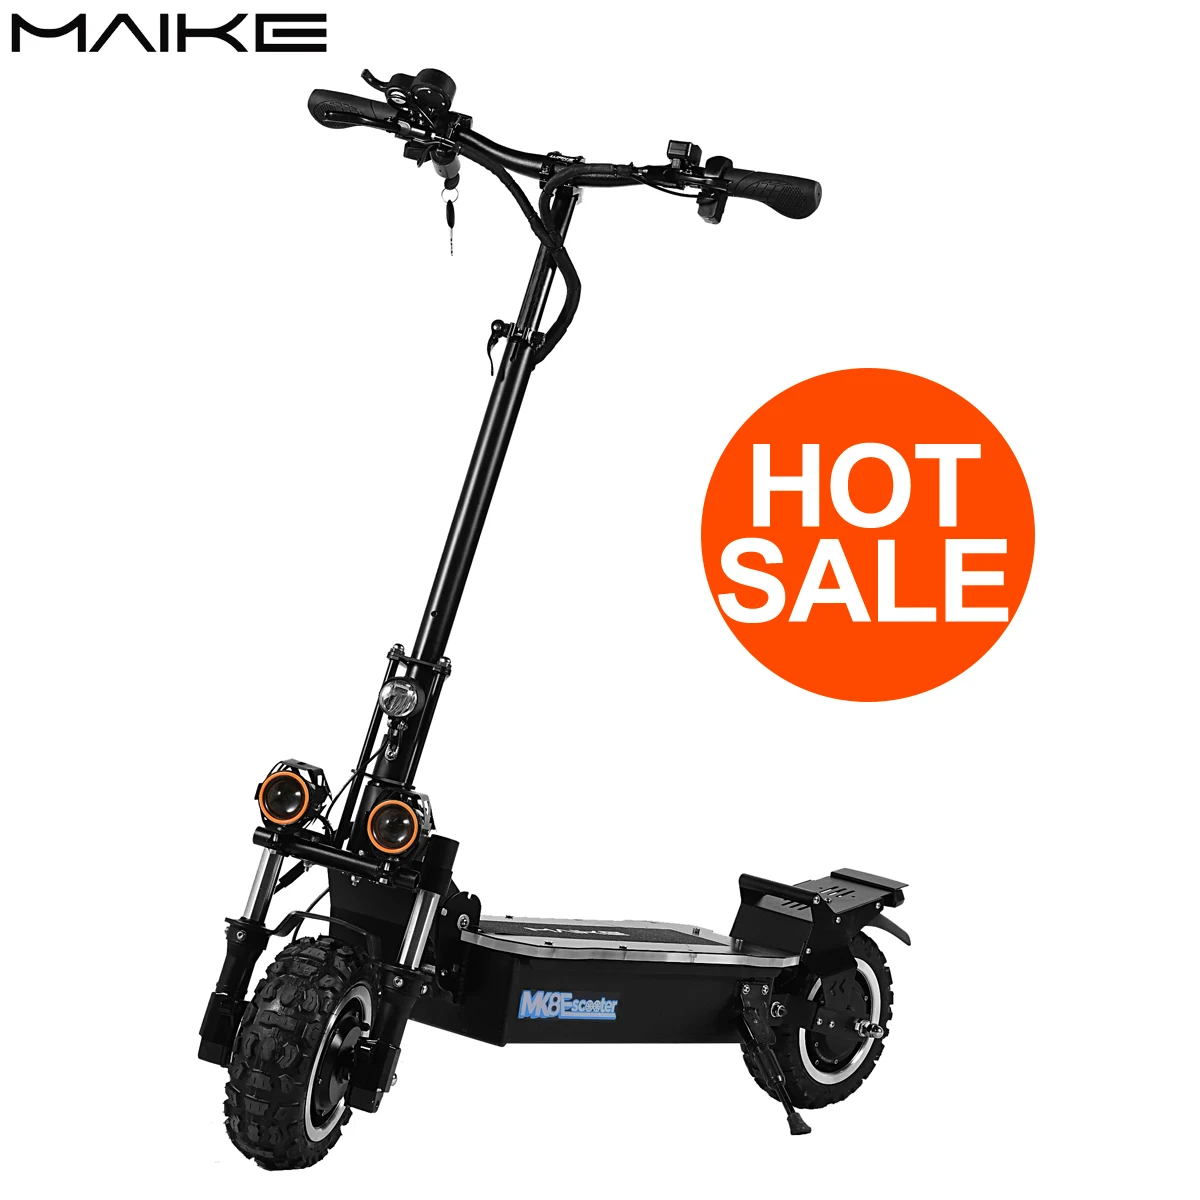 

Maike MK8 100km long range 5000W off road fast electric scooter adult dualtron scooter elettr